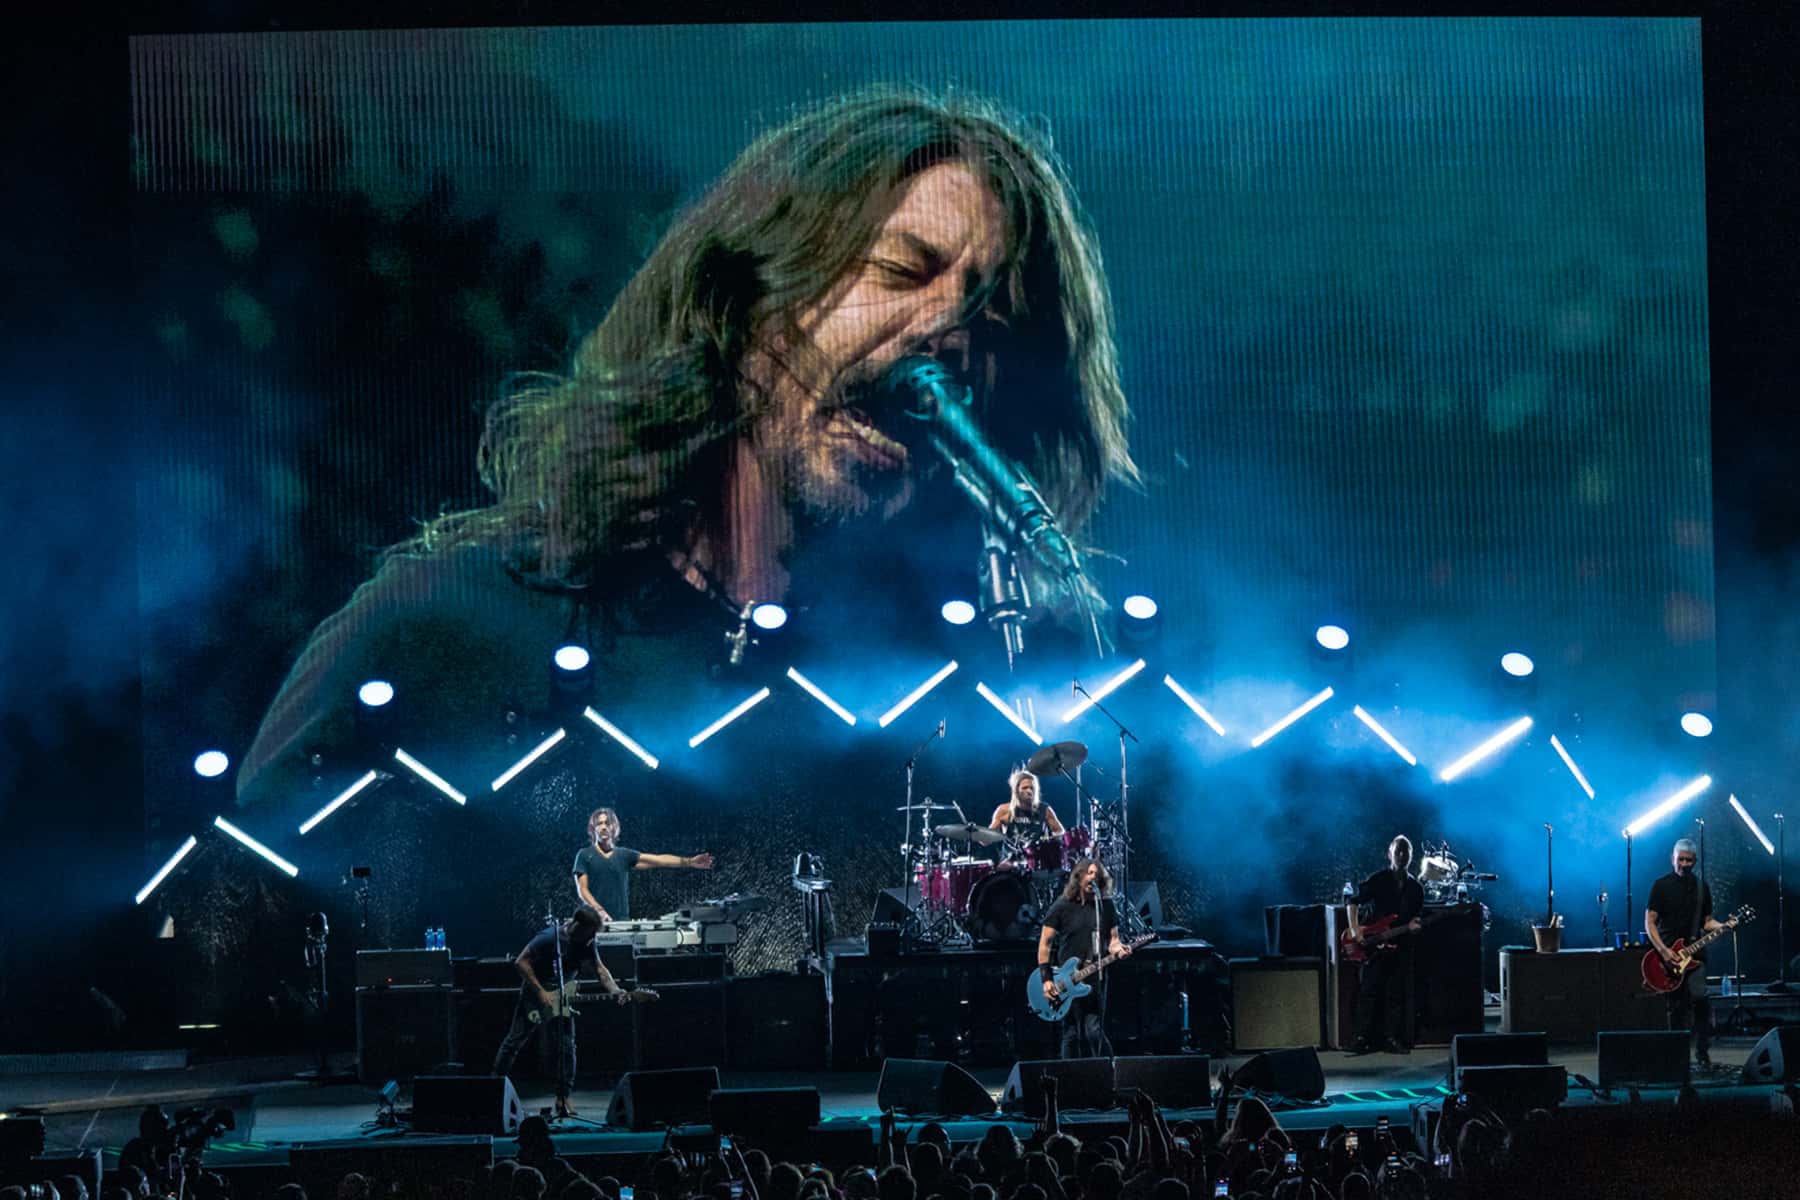 Live music returns: Foo Fighters perform first major concert in Milwaukee  since COVID to sold-out crowd | The Milwaukee Independent